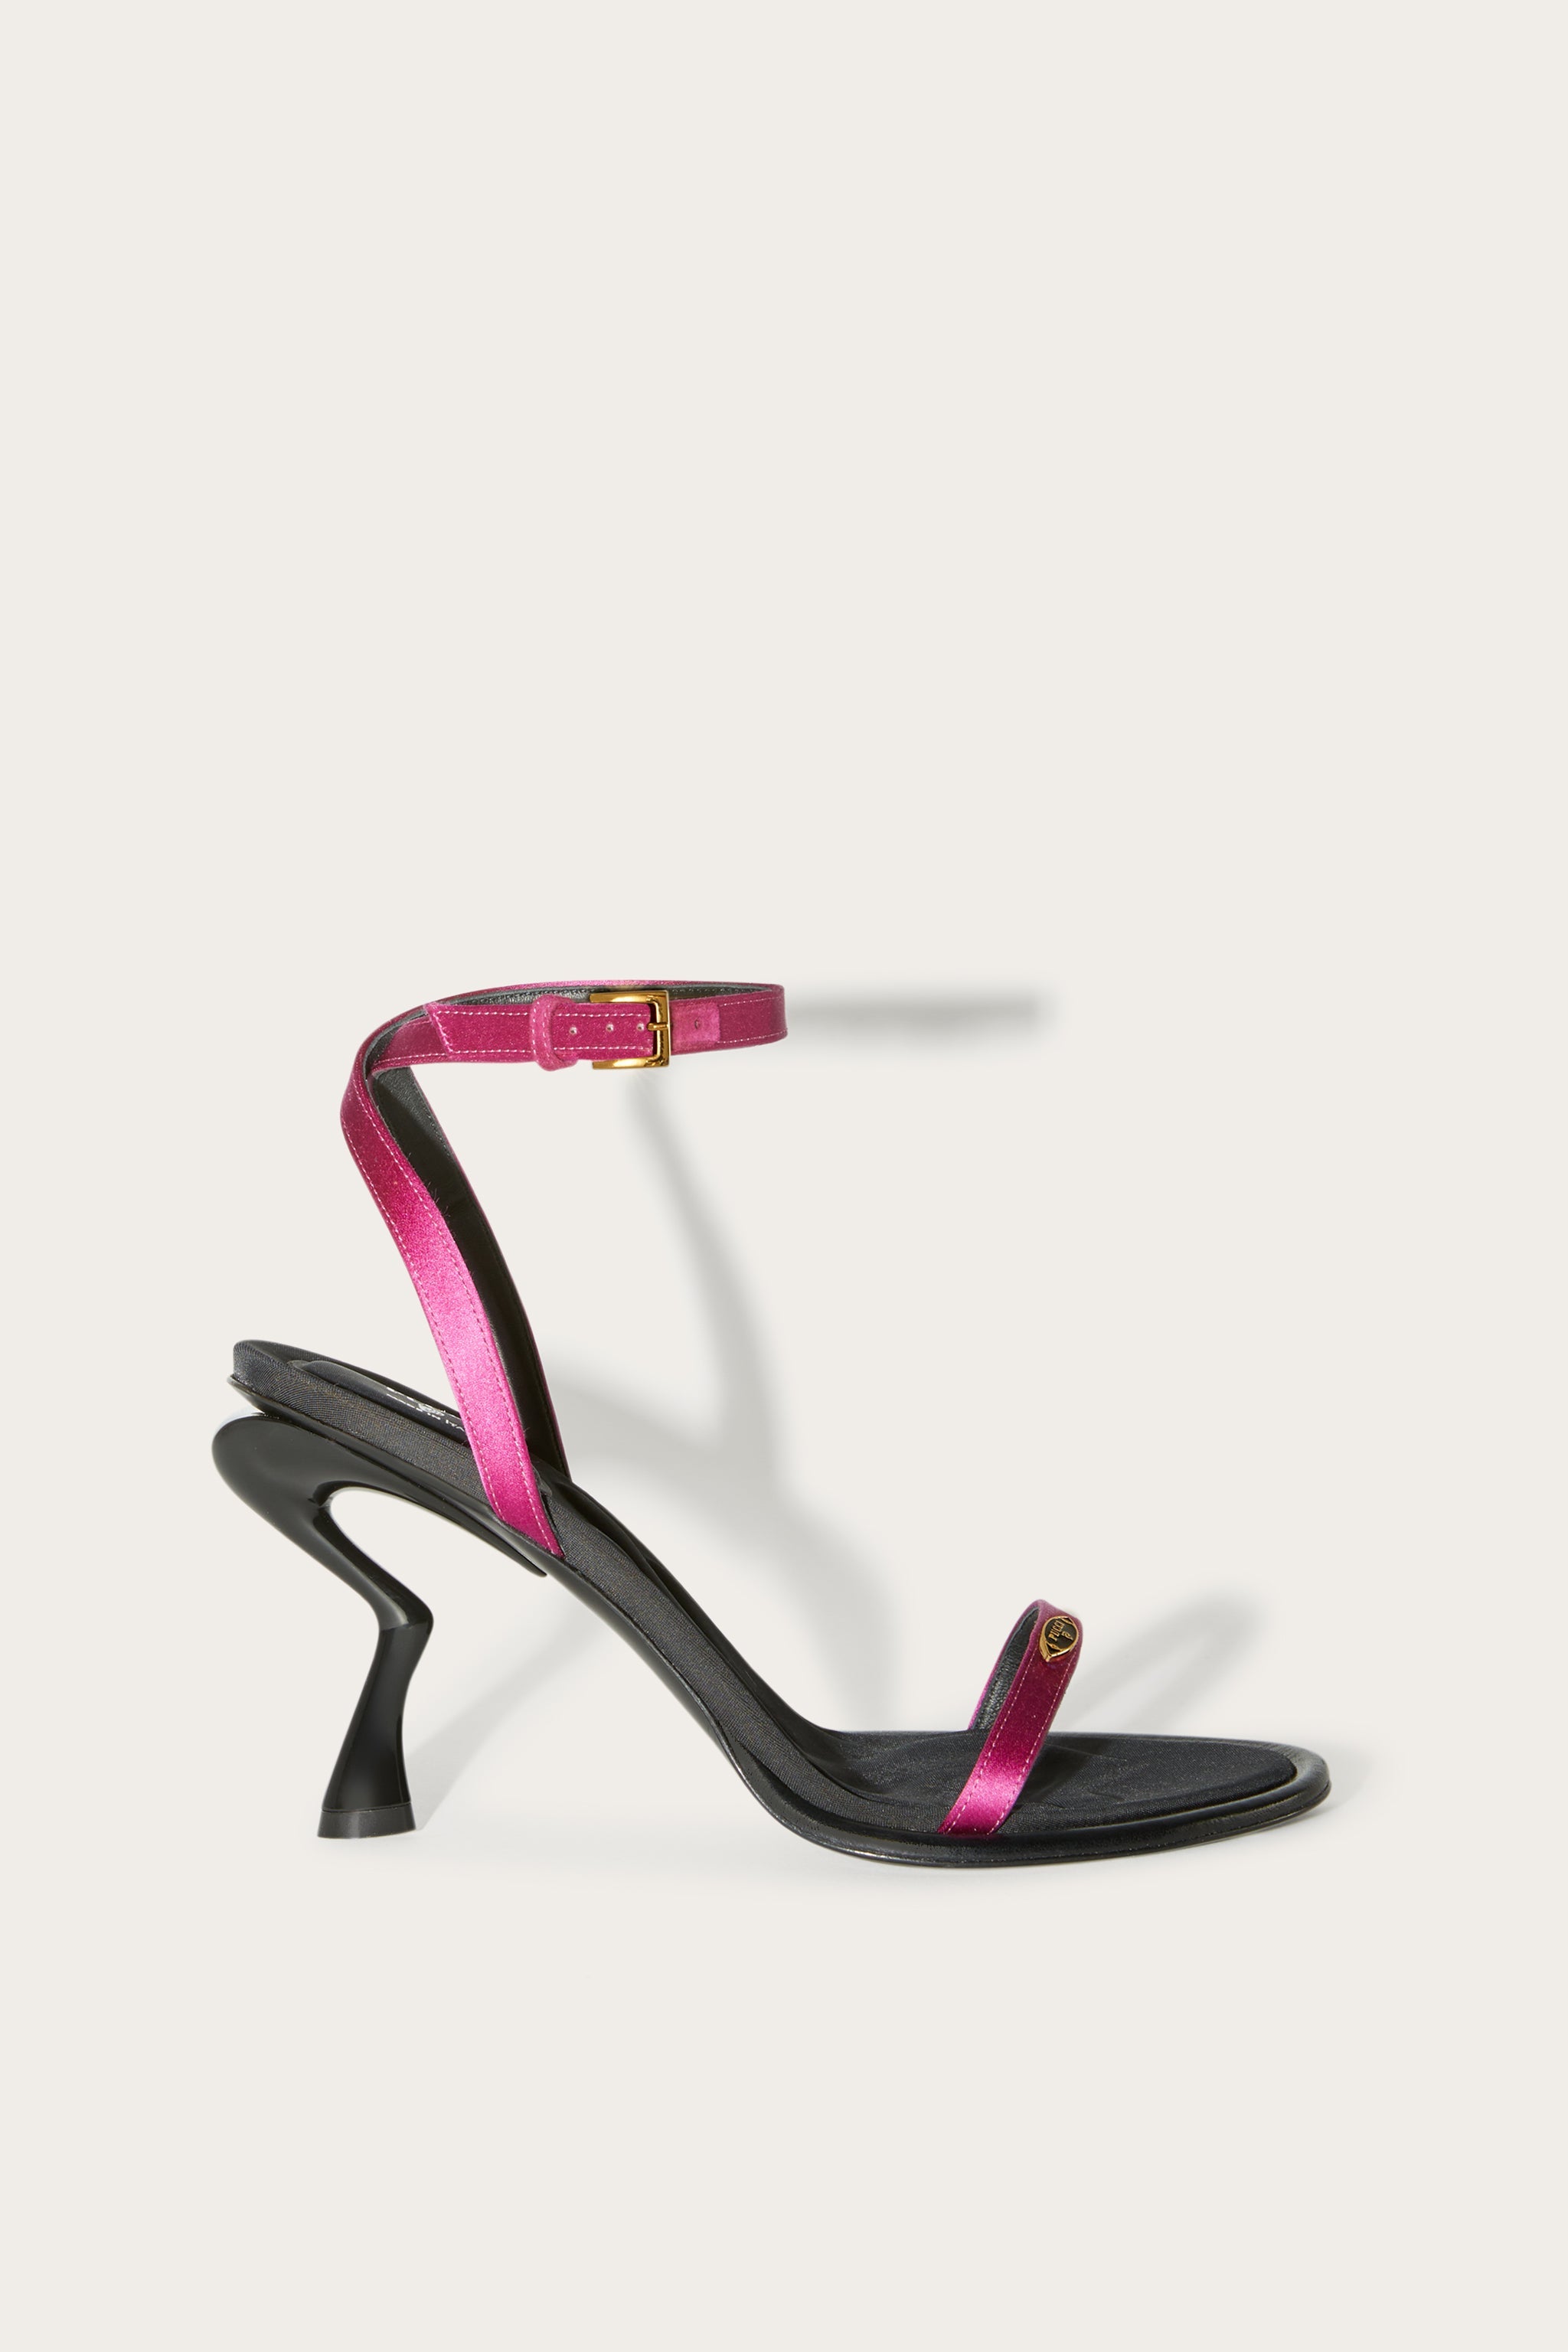 Pucci shoes: italian shoes made by designer | PuccI